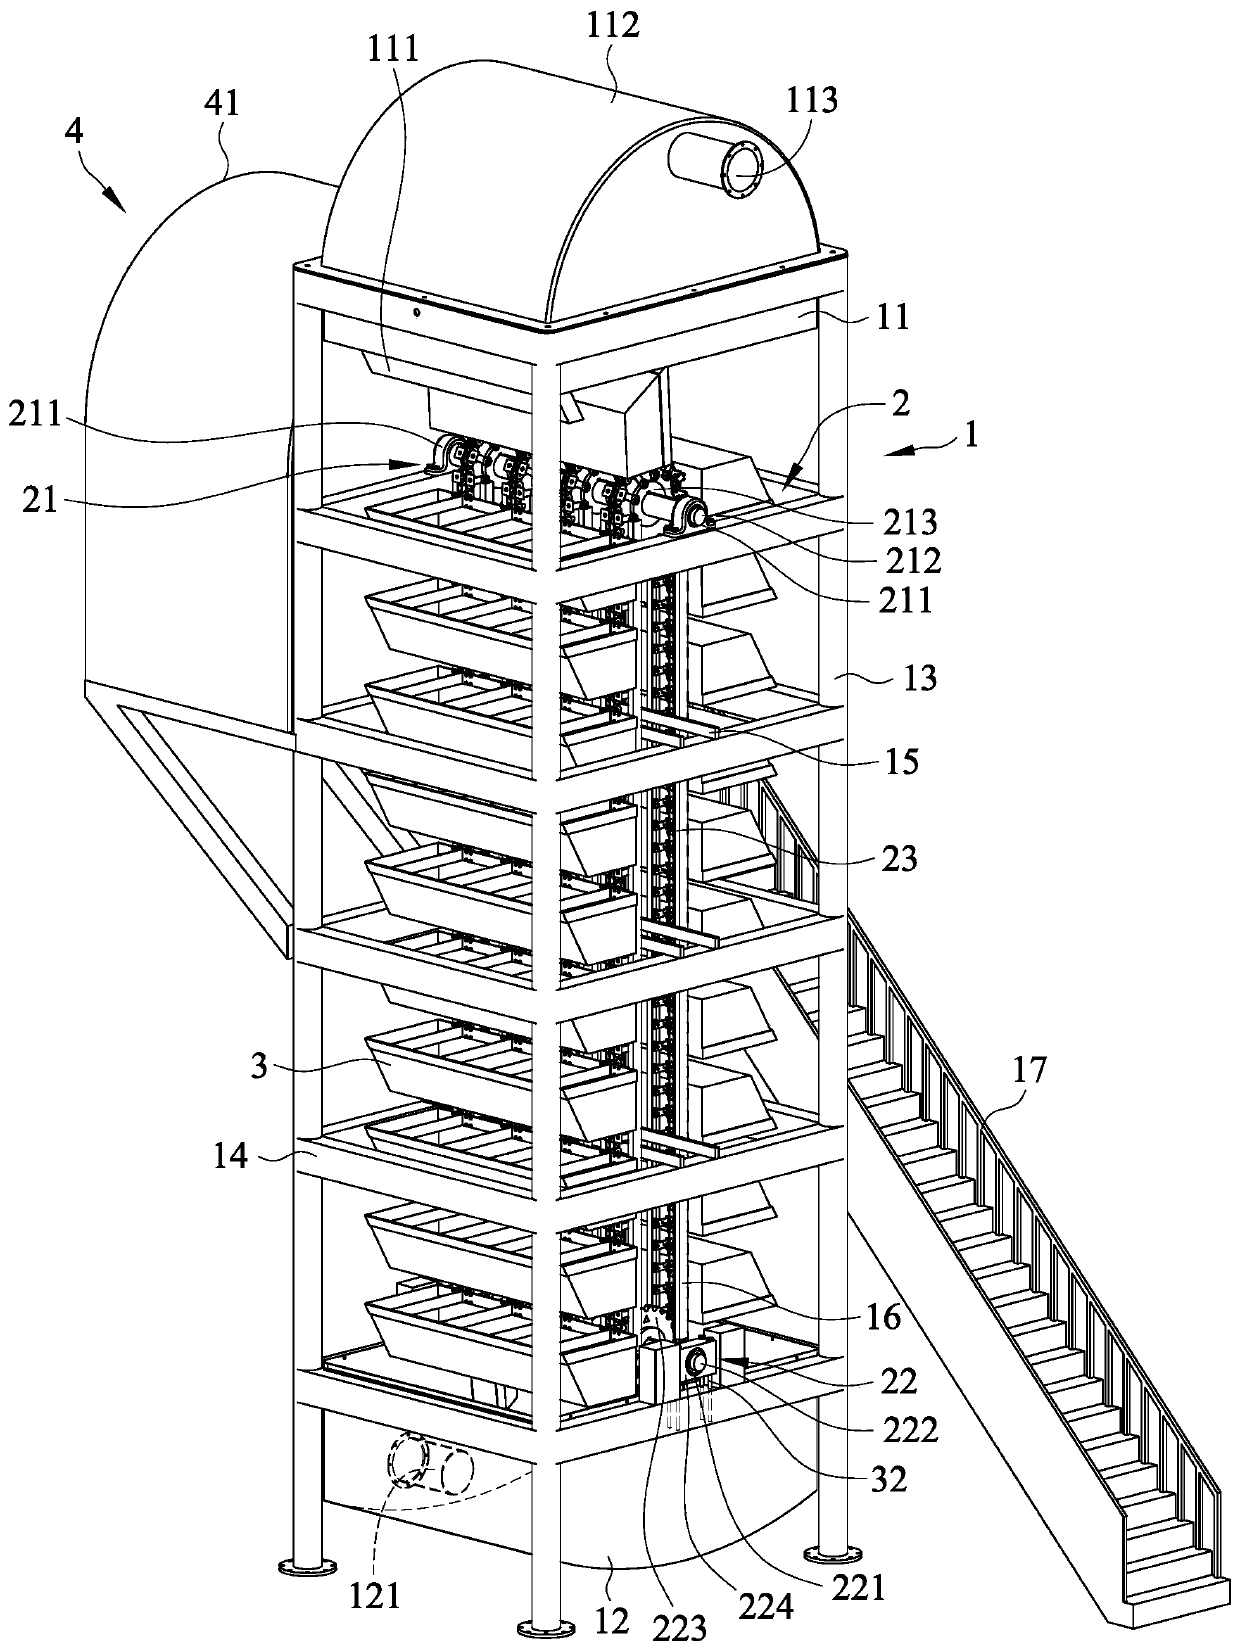 Hydroelectric power generation tower utilizing vertical potential energy